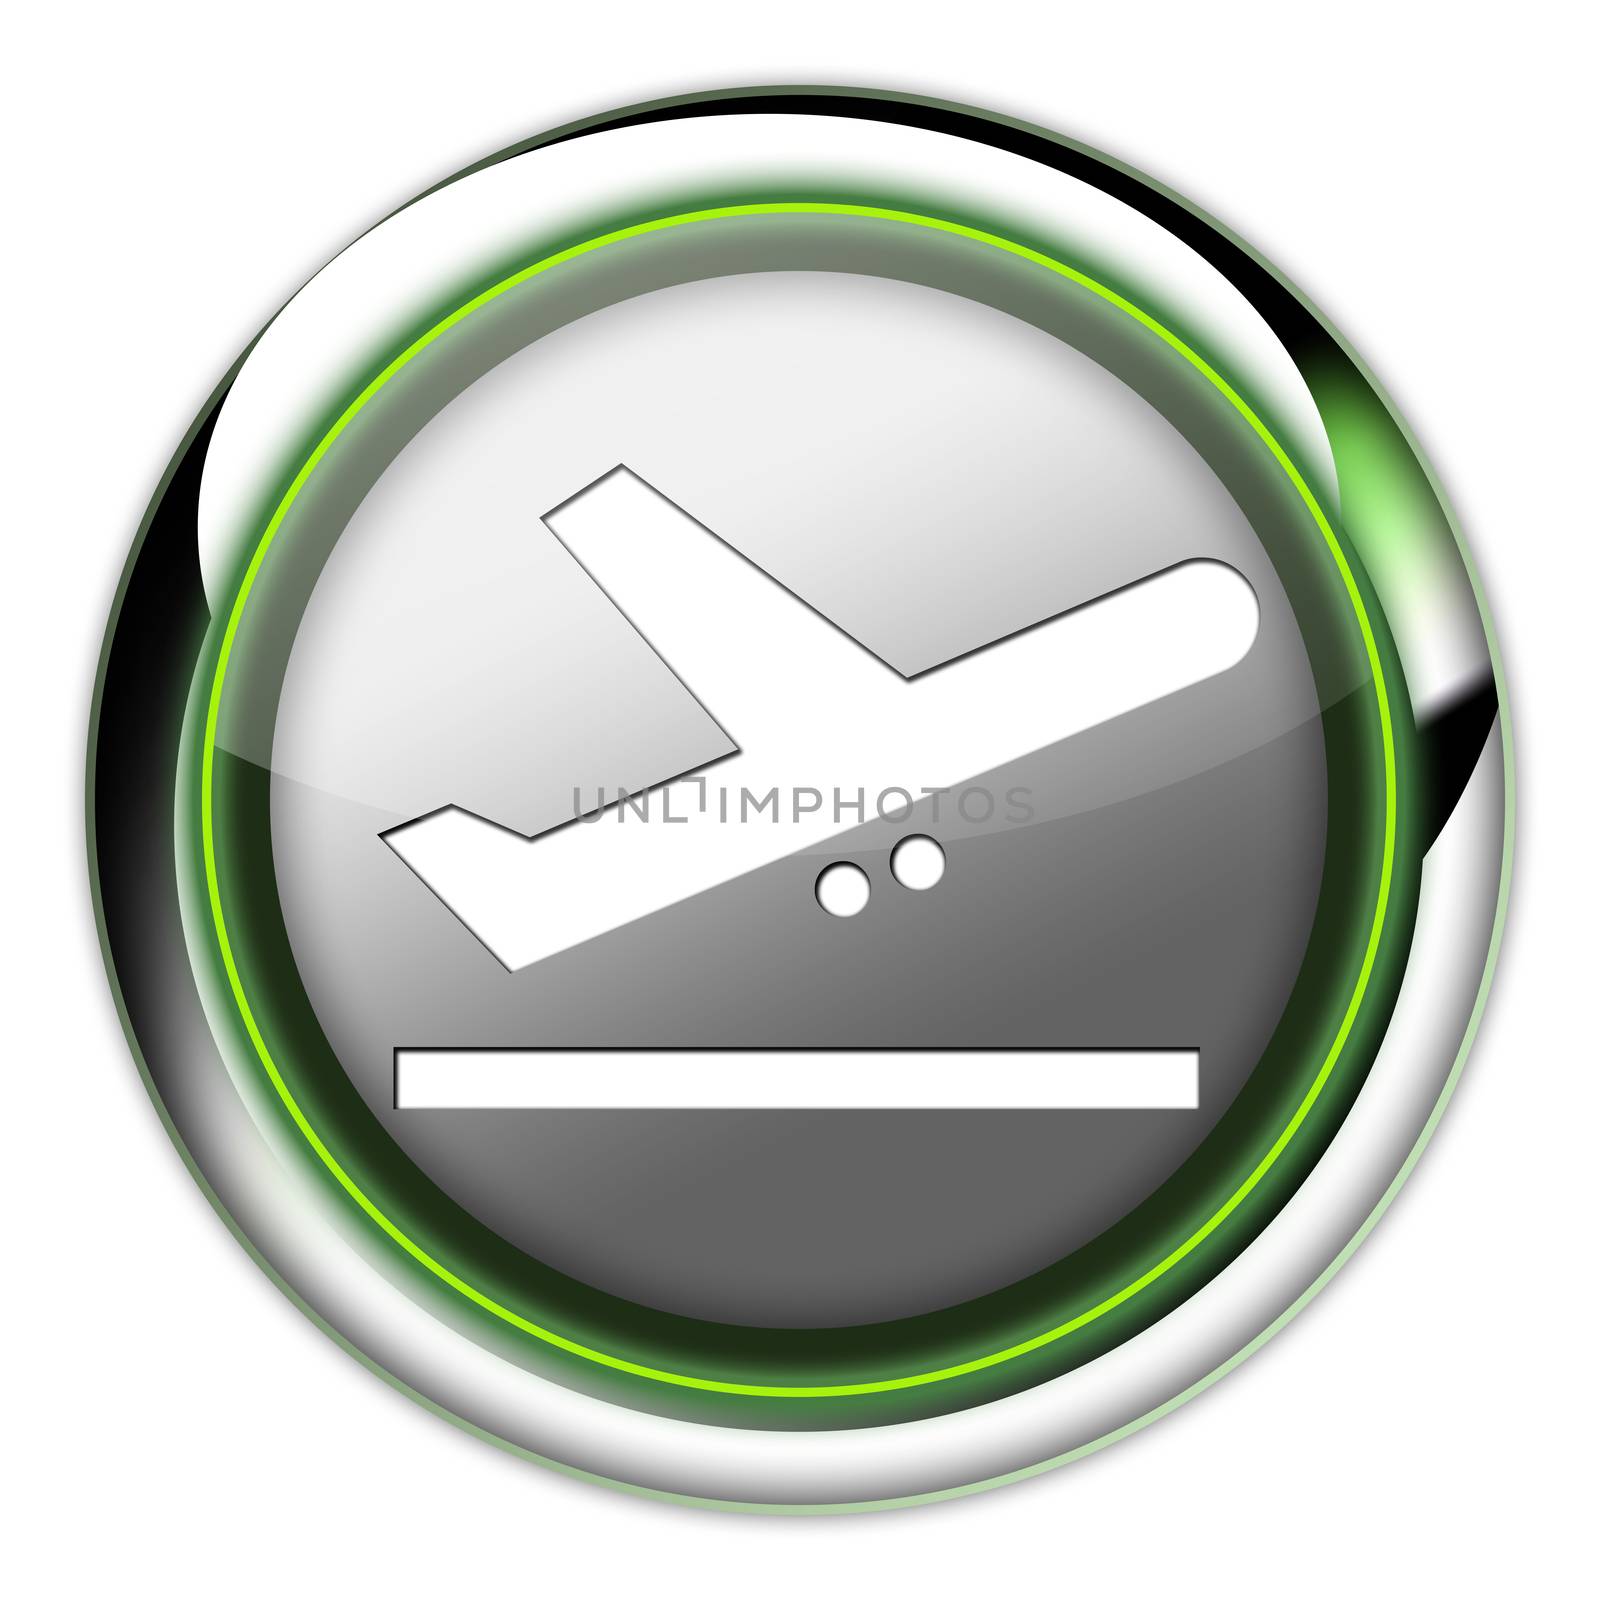 Icon, Button, Pictogram with Airport Departures symbol